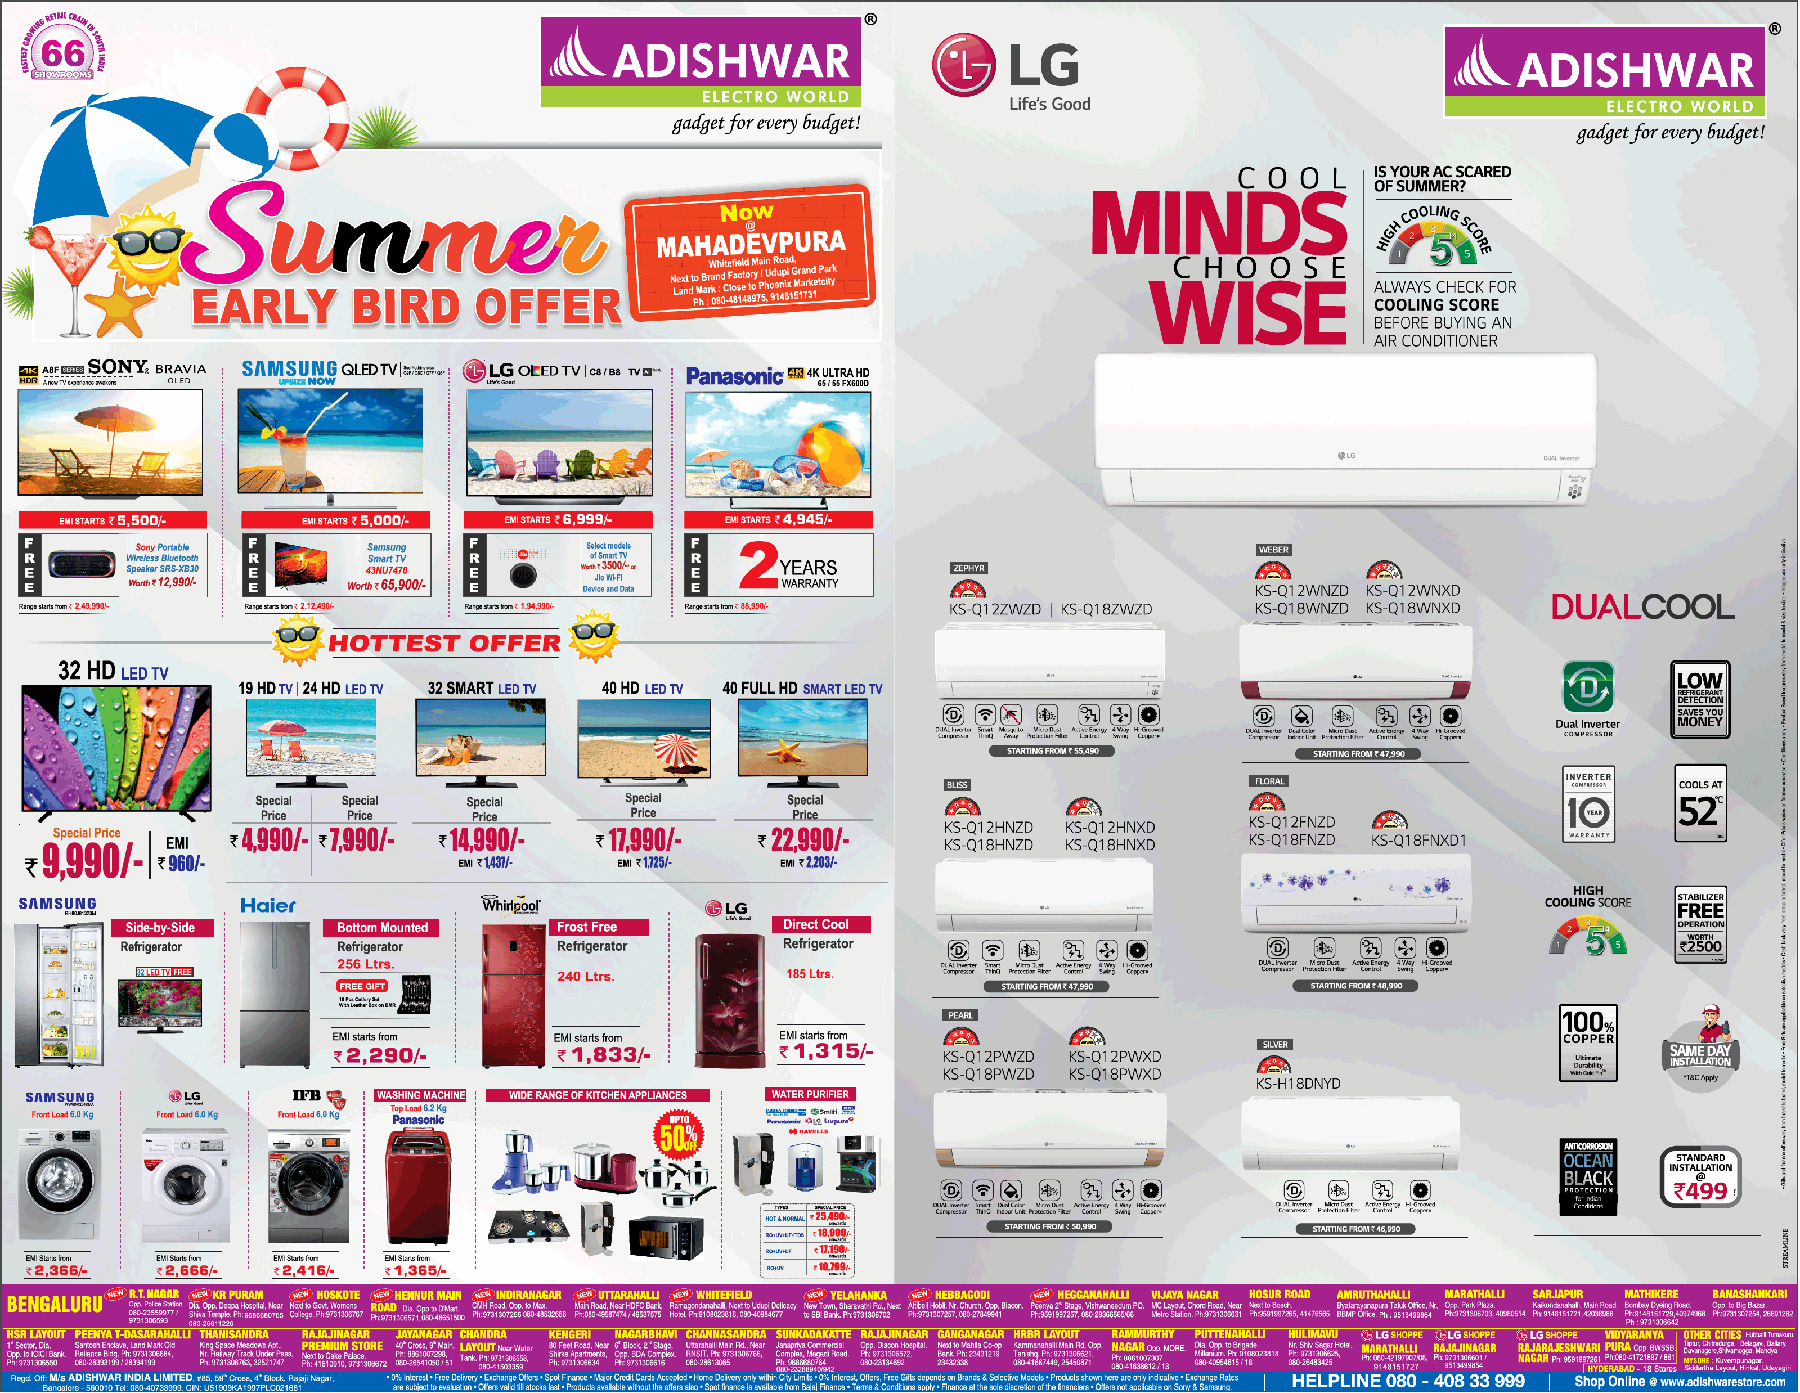 adishwar-home-appliancess-ummer-early-bird-offer-ad-times-of-india-bangalore-02-02-2019.png